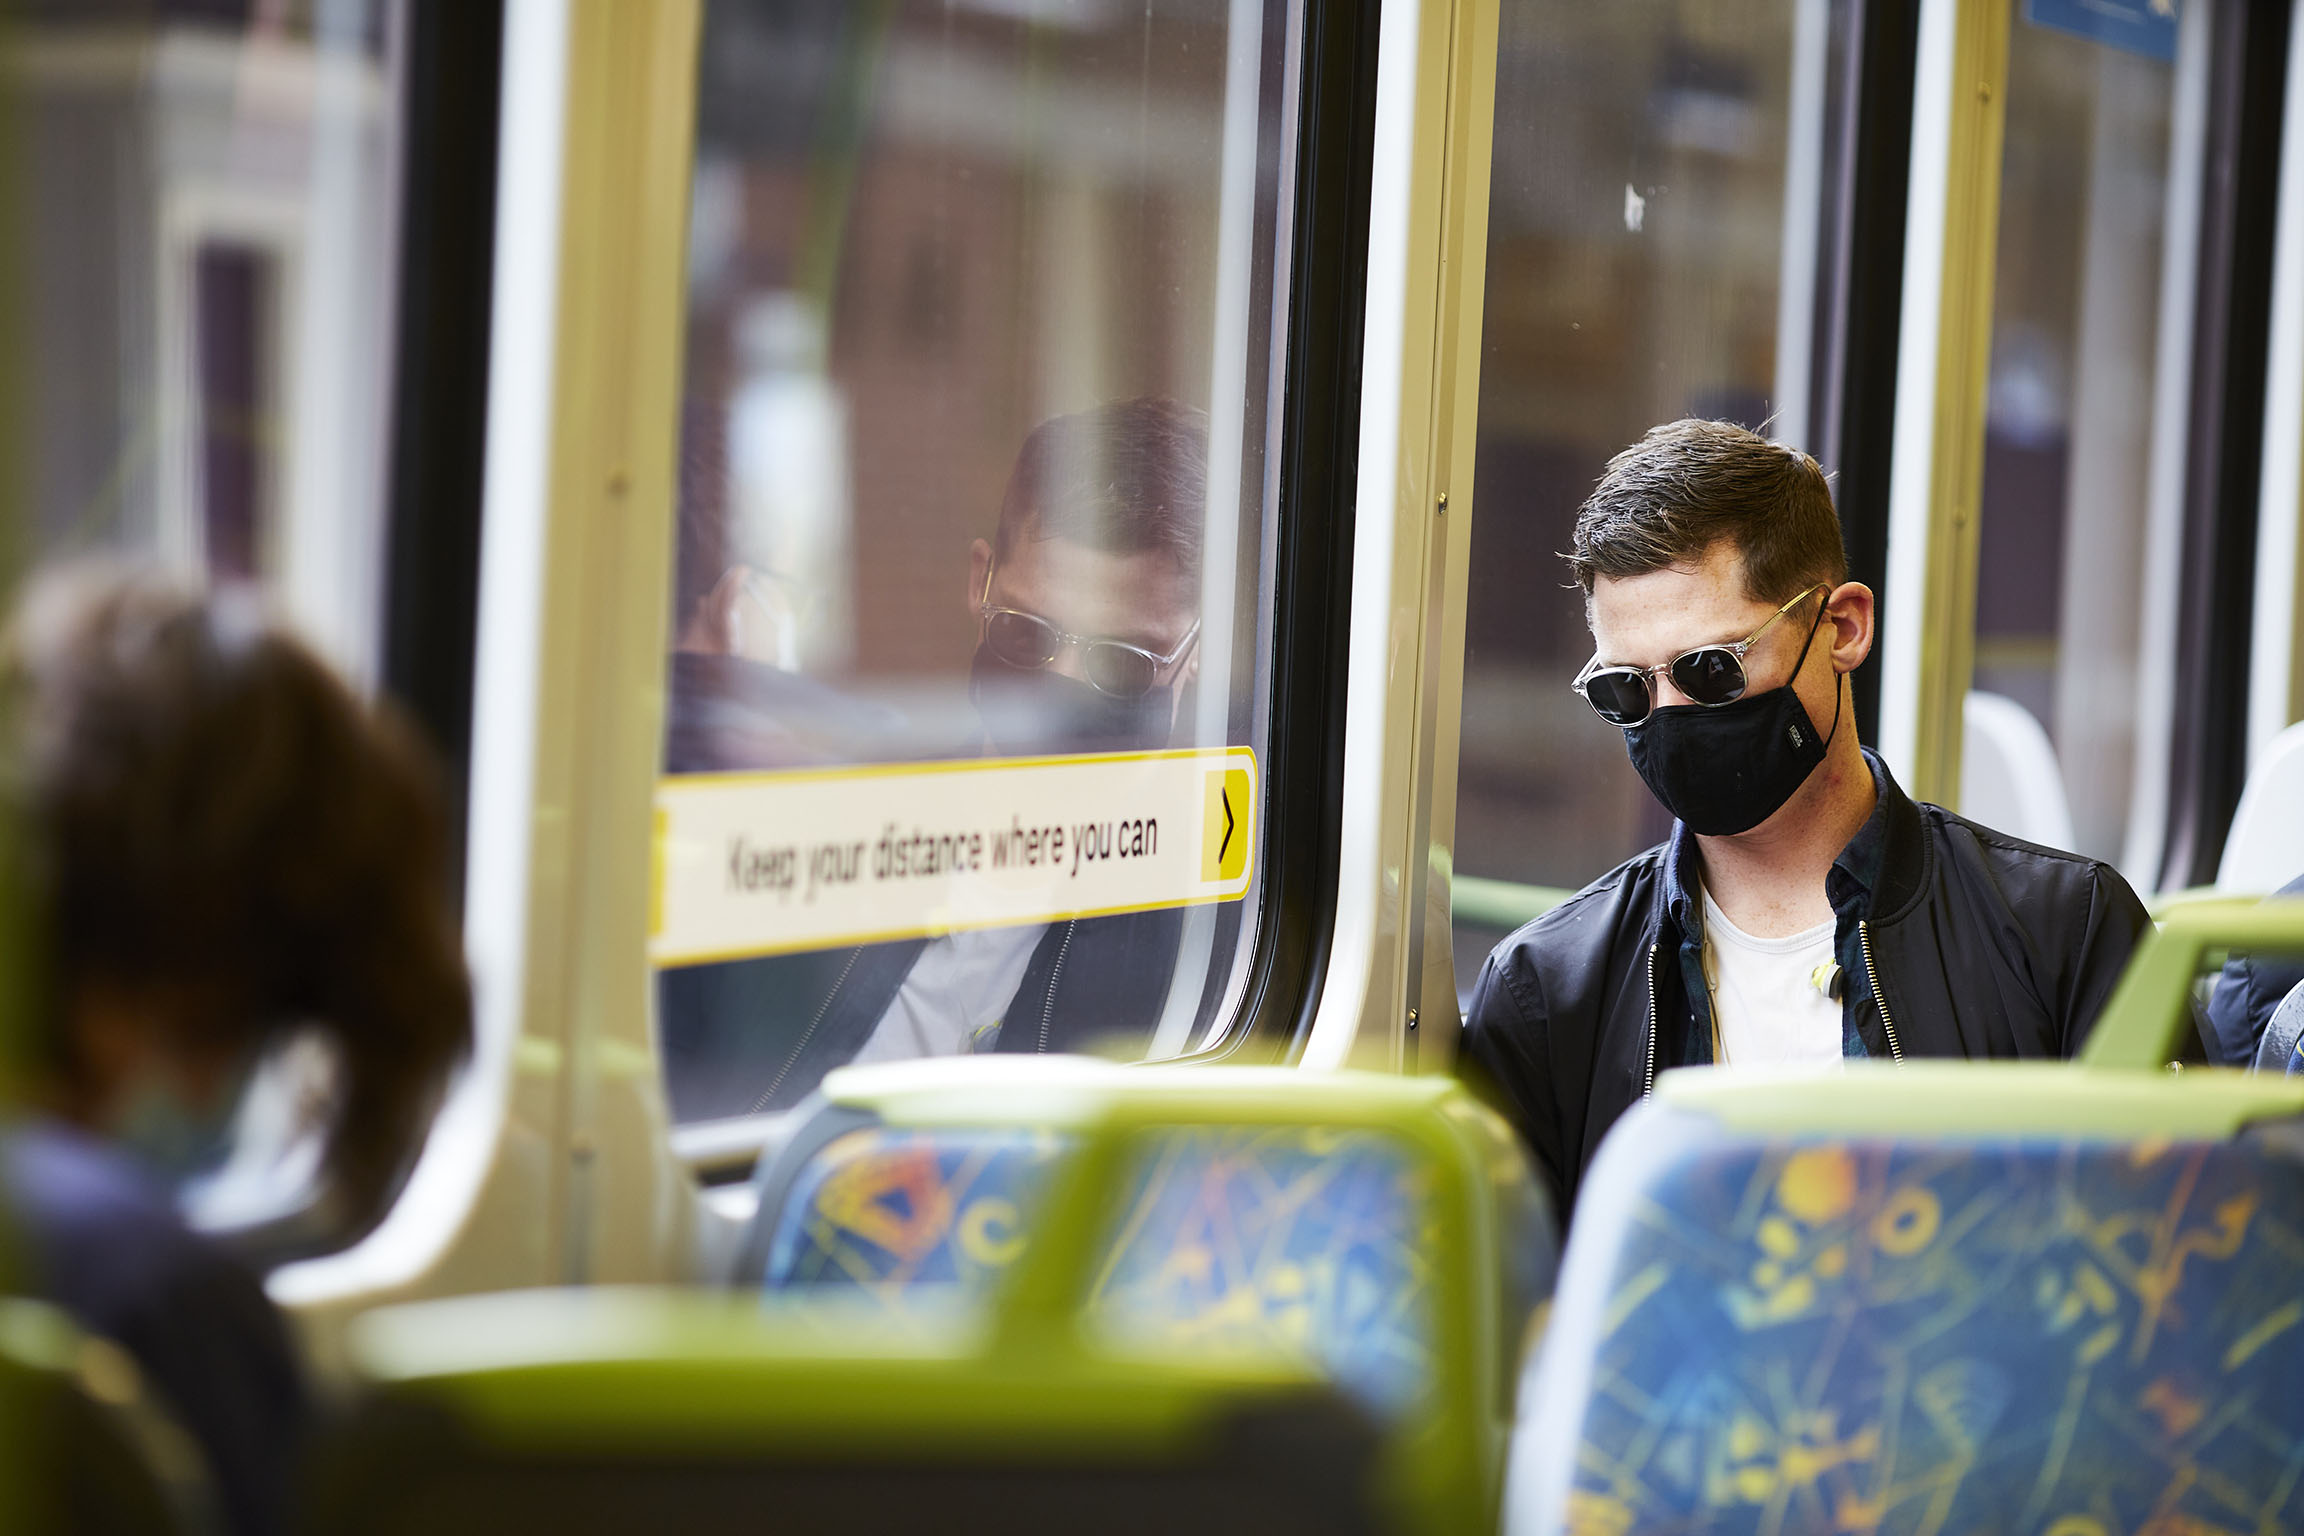 Image is a photograph of a passenger wearing a face mask while travelling on a Metro train. The passenger is a young Caucasian male with short brown hair. He is wearing dark sunglasses with clear frames, a black face mask, black leather jacket and a white t-shirt. He is looking down at his phone and leaning against the window of the train carriage. A blurred station platform is visible through the window.